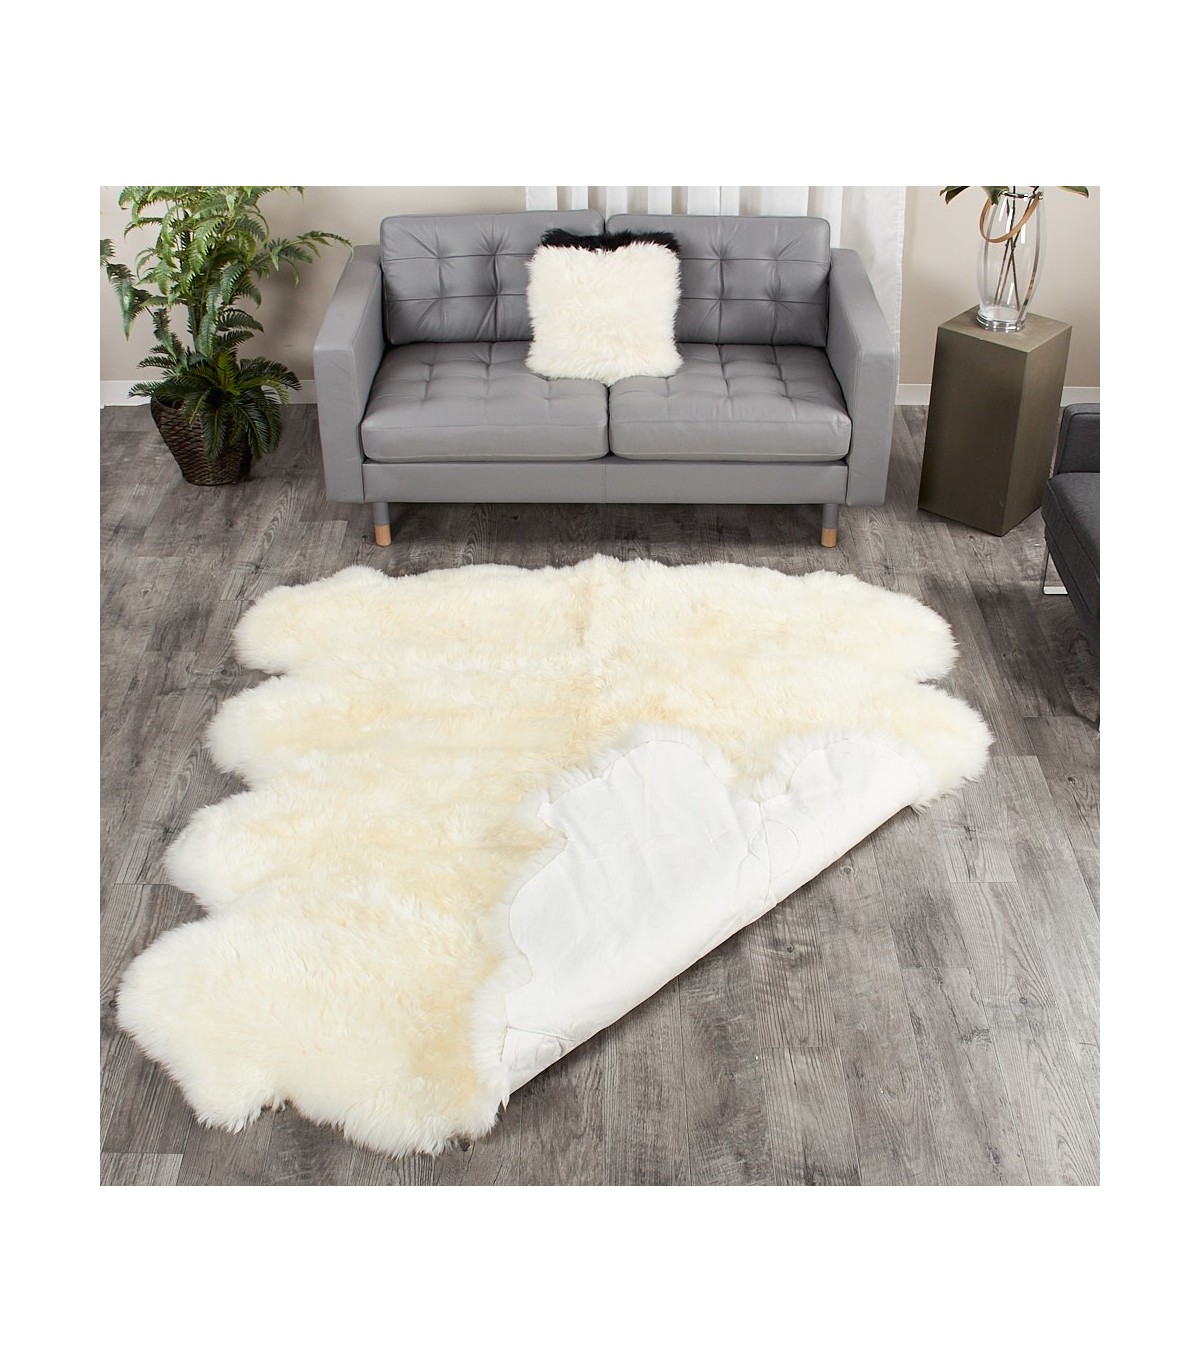 48" x 58" Large Warm White Sheepskin Pelt Octo Sheep Area Rug Faux Fur Accent 